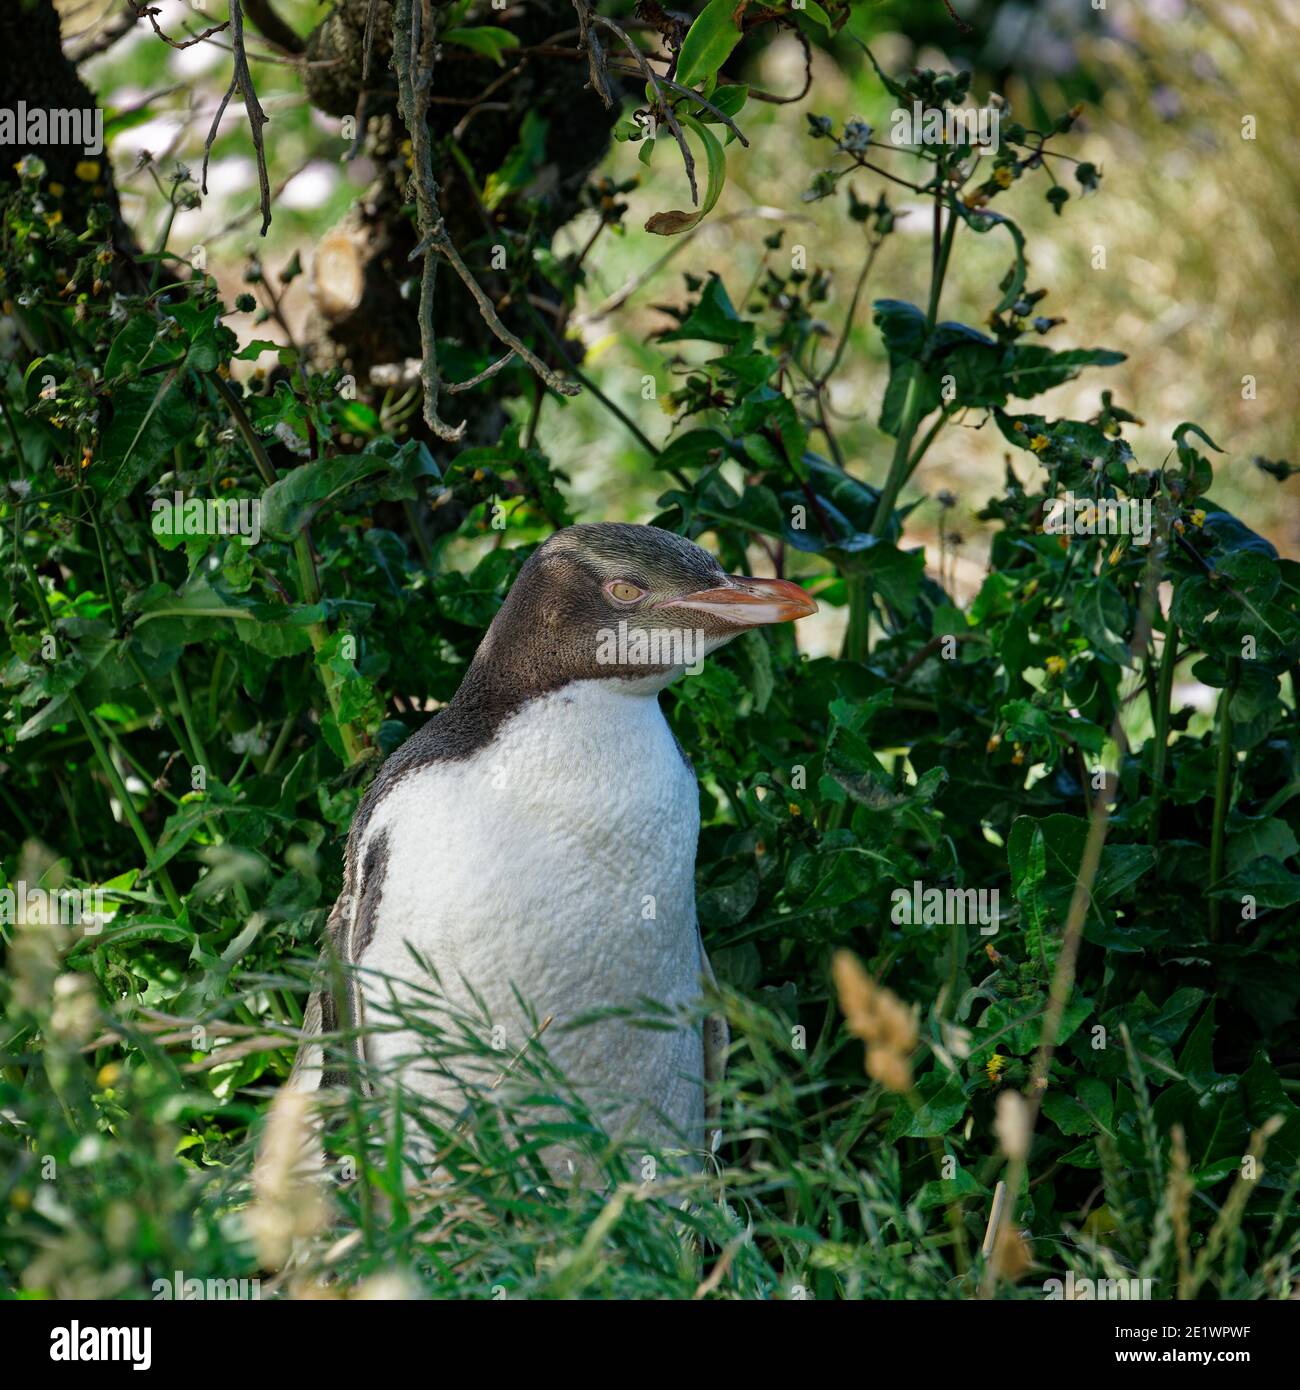 A baby yellow-eyed penguin hiding in undergrowth waiting for a parent to return to feed it, Otago, New Zealand. Stock Photo